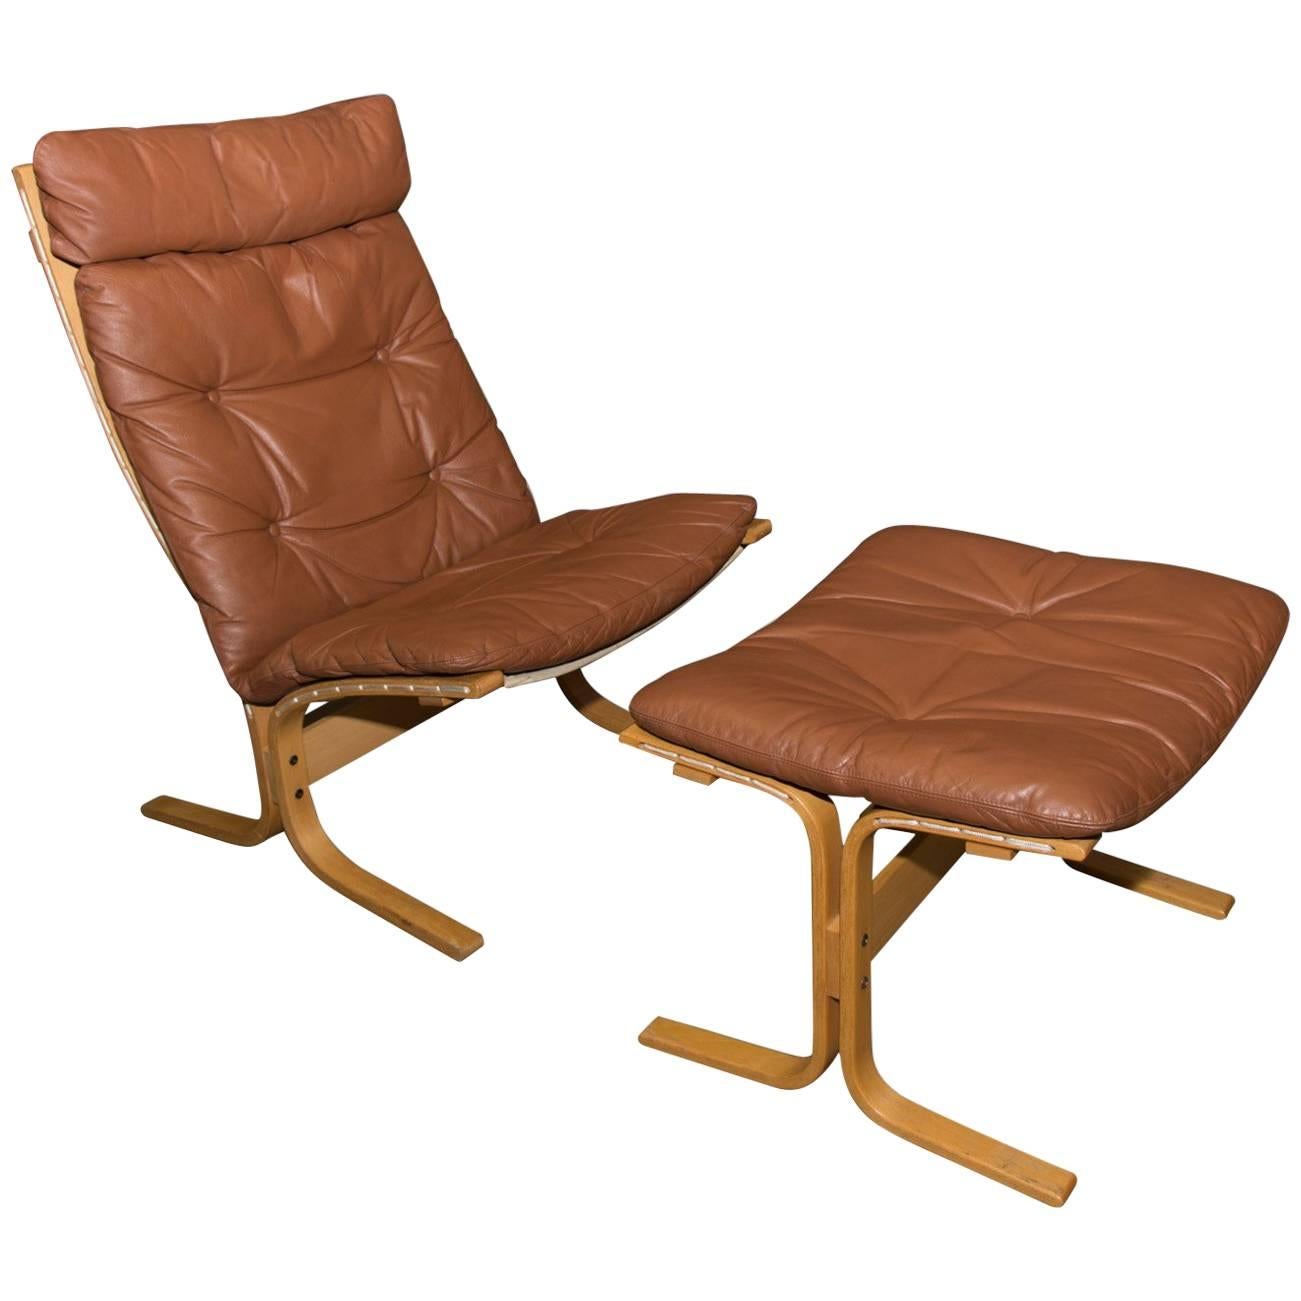 Midcentury Siesta Lounge Leather Chair and Ottoman by Ingmar Relling, Westnofa